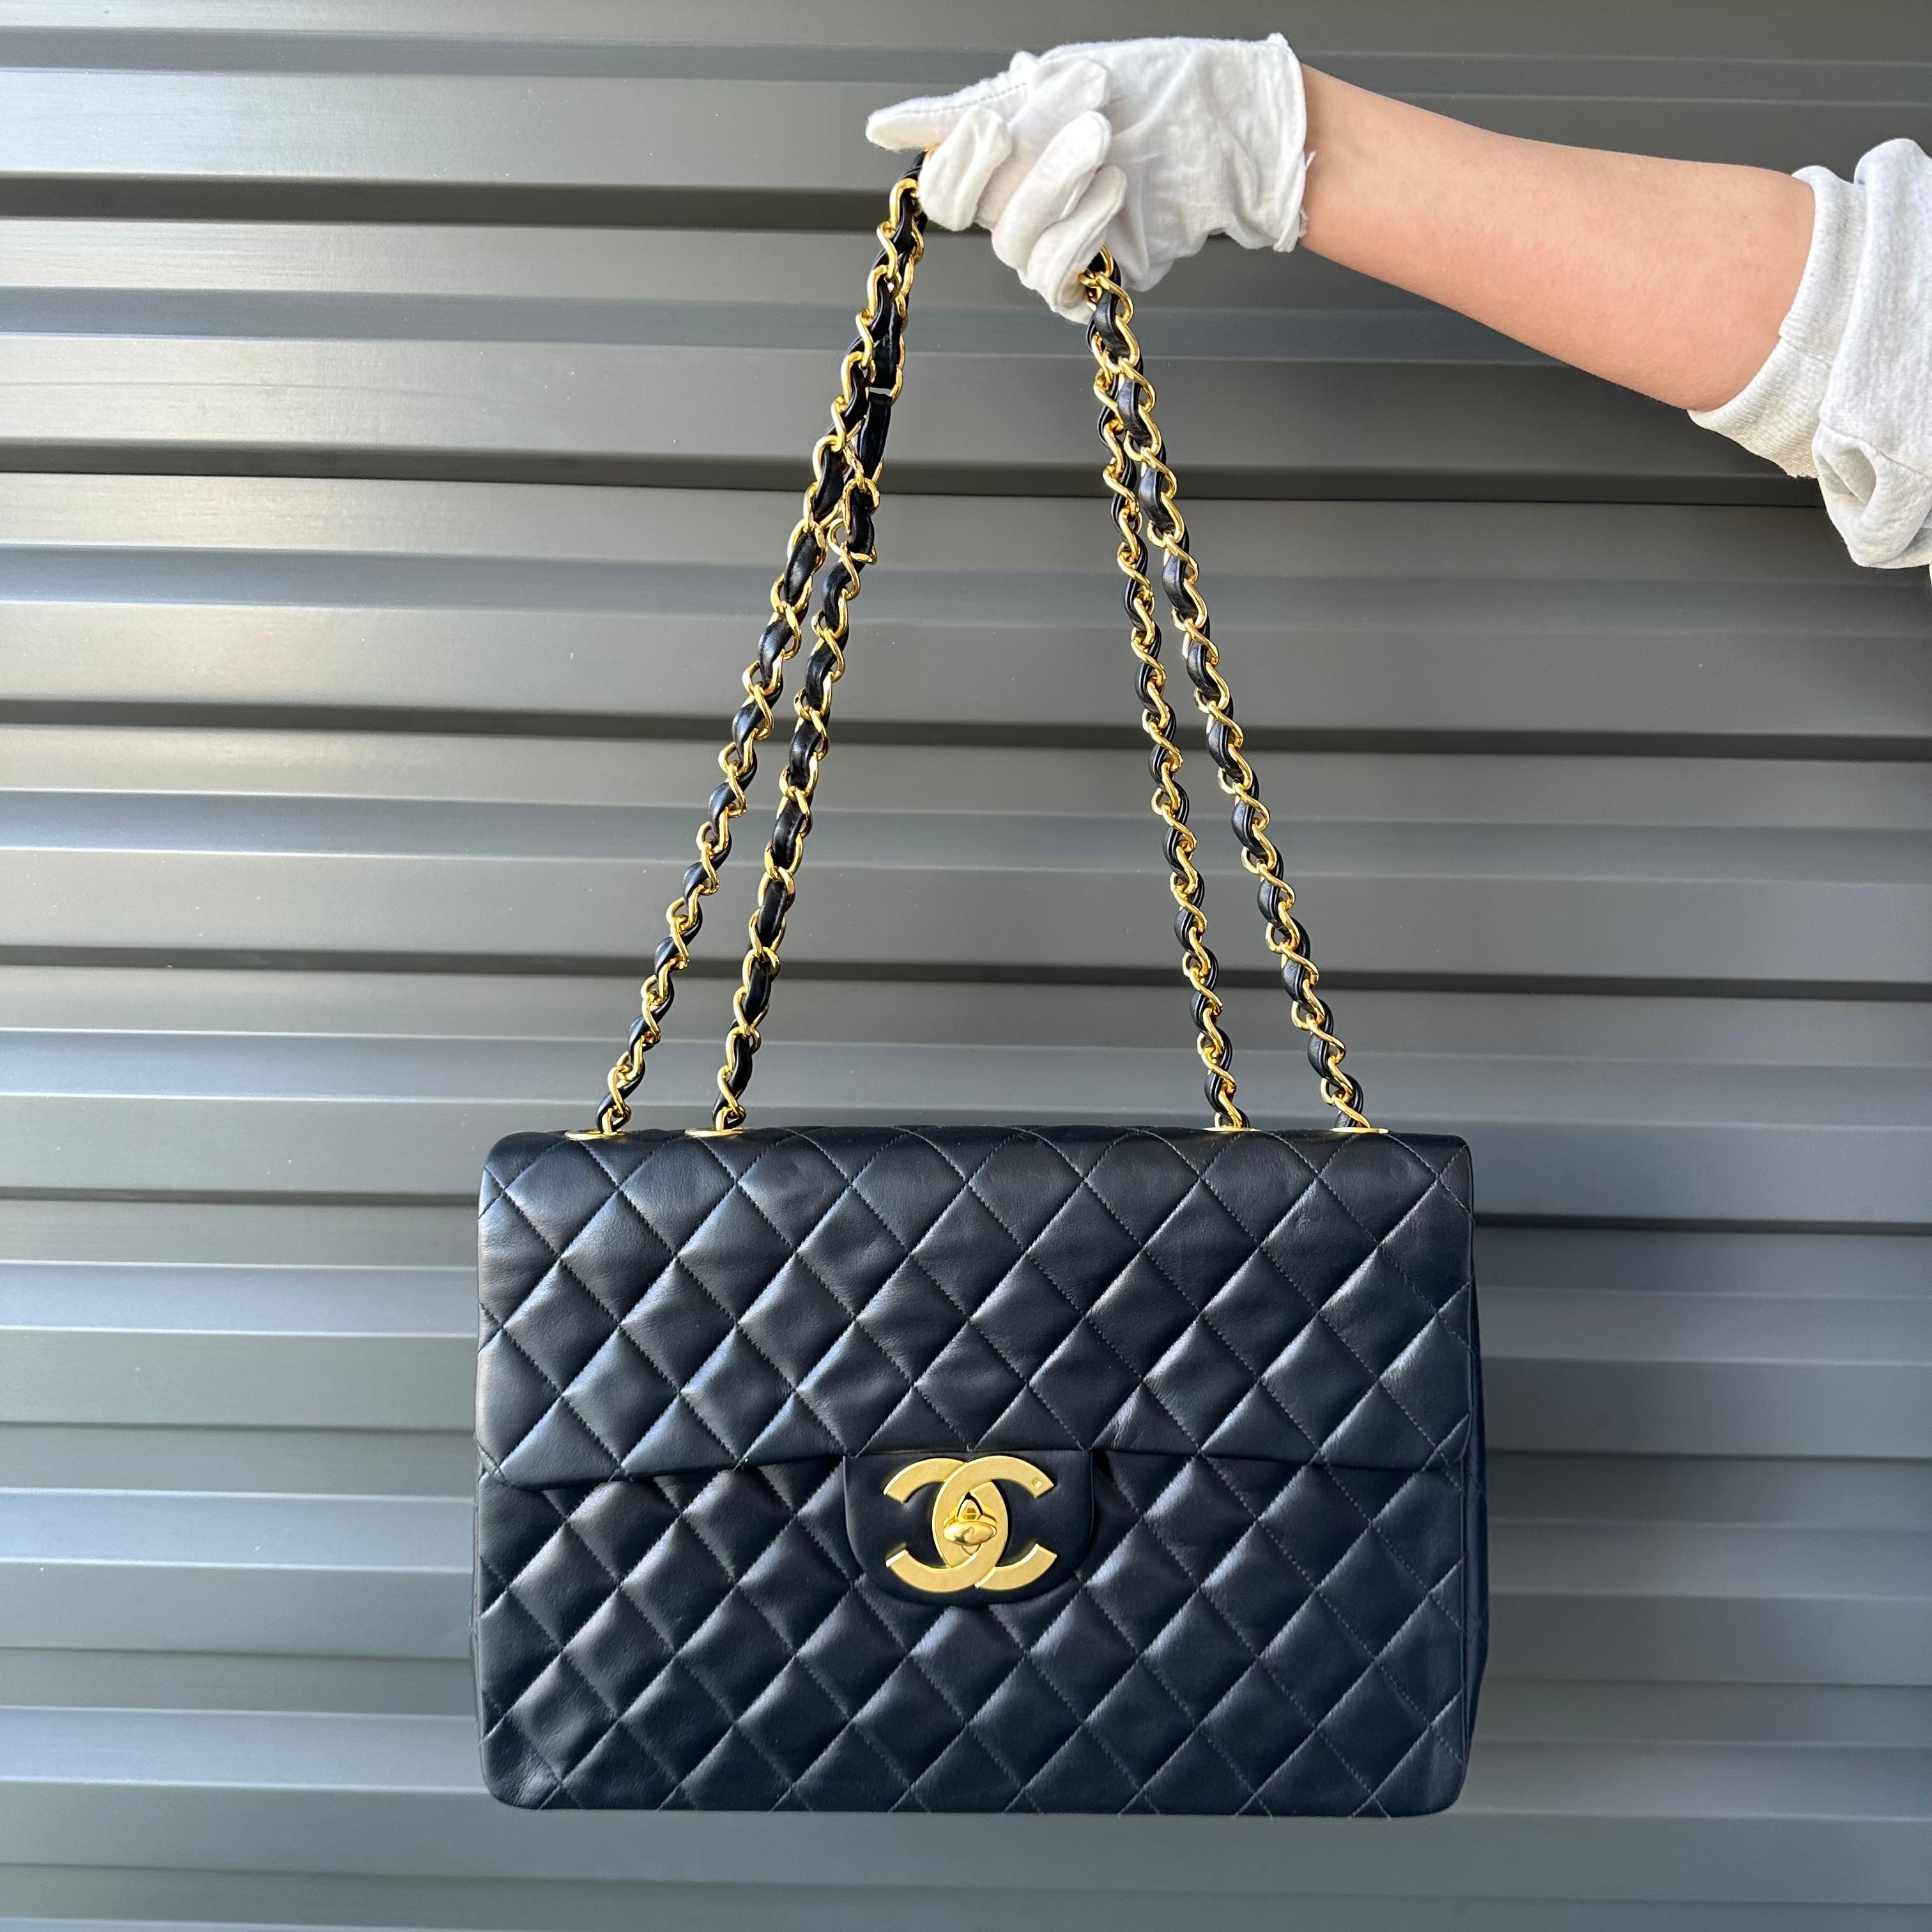 Description: This is a gorgeous Chanel Vintage Lambskin Quilted Leather Maxi Single Classic Flap XL featuring oversized 24 karat gold-plated CC logo hardware, black leather interwoven gold chain, burgundy lambskin interior lining with zipper and